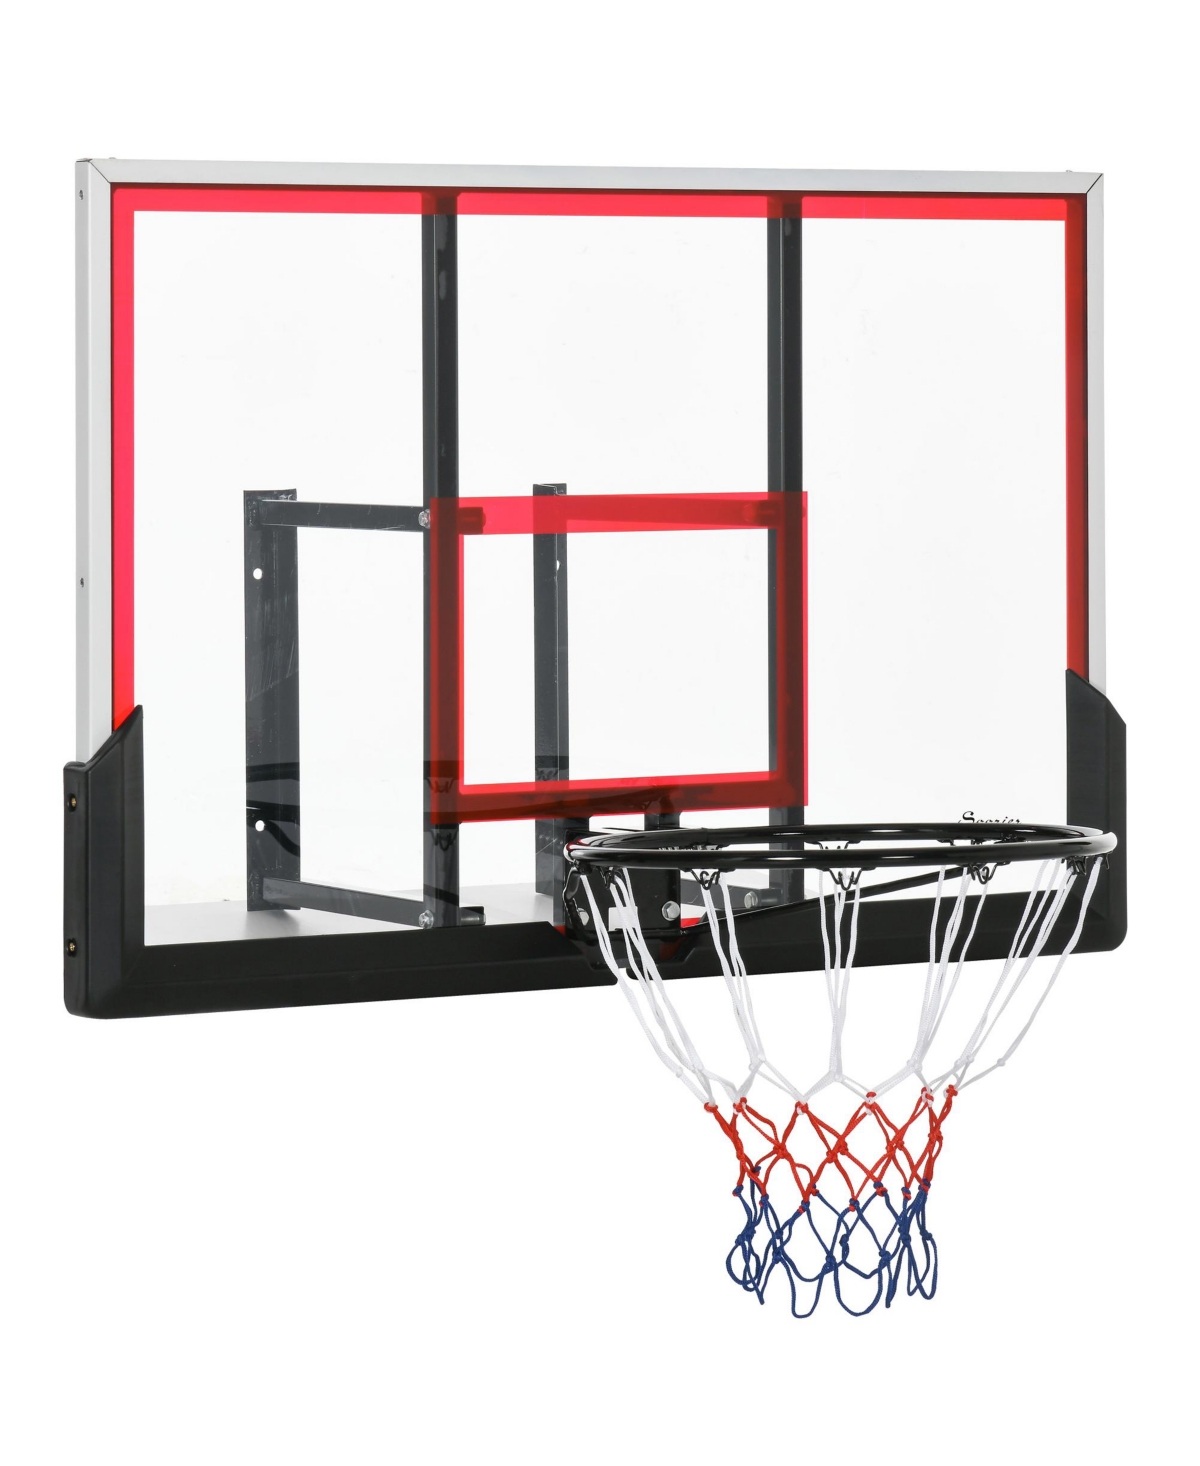 Wall Mounted Basketball Hoop, Mini Hoop Basketball Goal with 43" x 30" Shatter Proof Backboard, Durable Bracket and All Weather Net for Outdoo